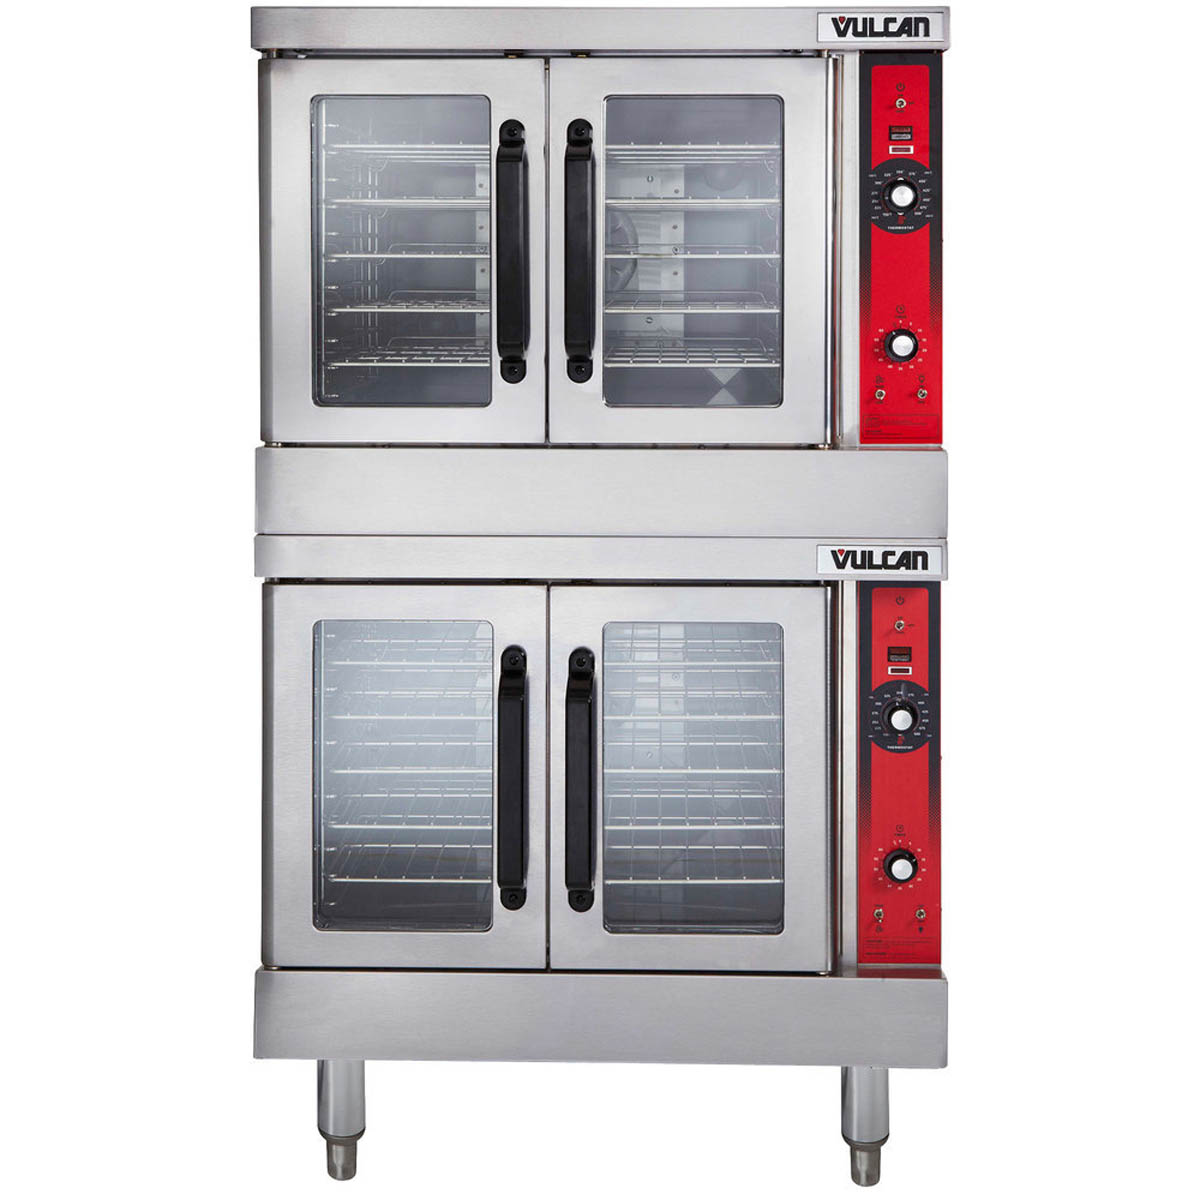 Vulcan VC55GD DOUBLE DECK GAS CONVECTION OVEN WITH REMOVABLE DOORS